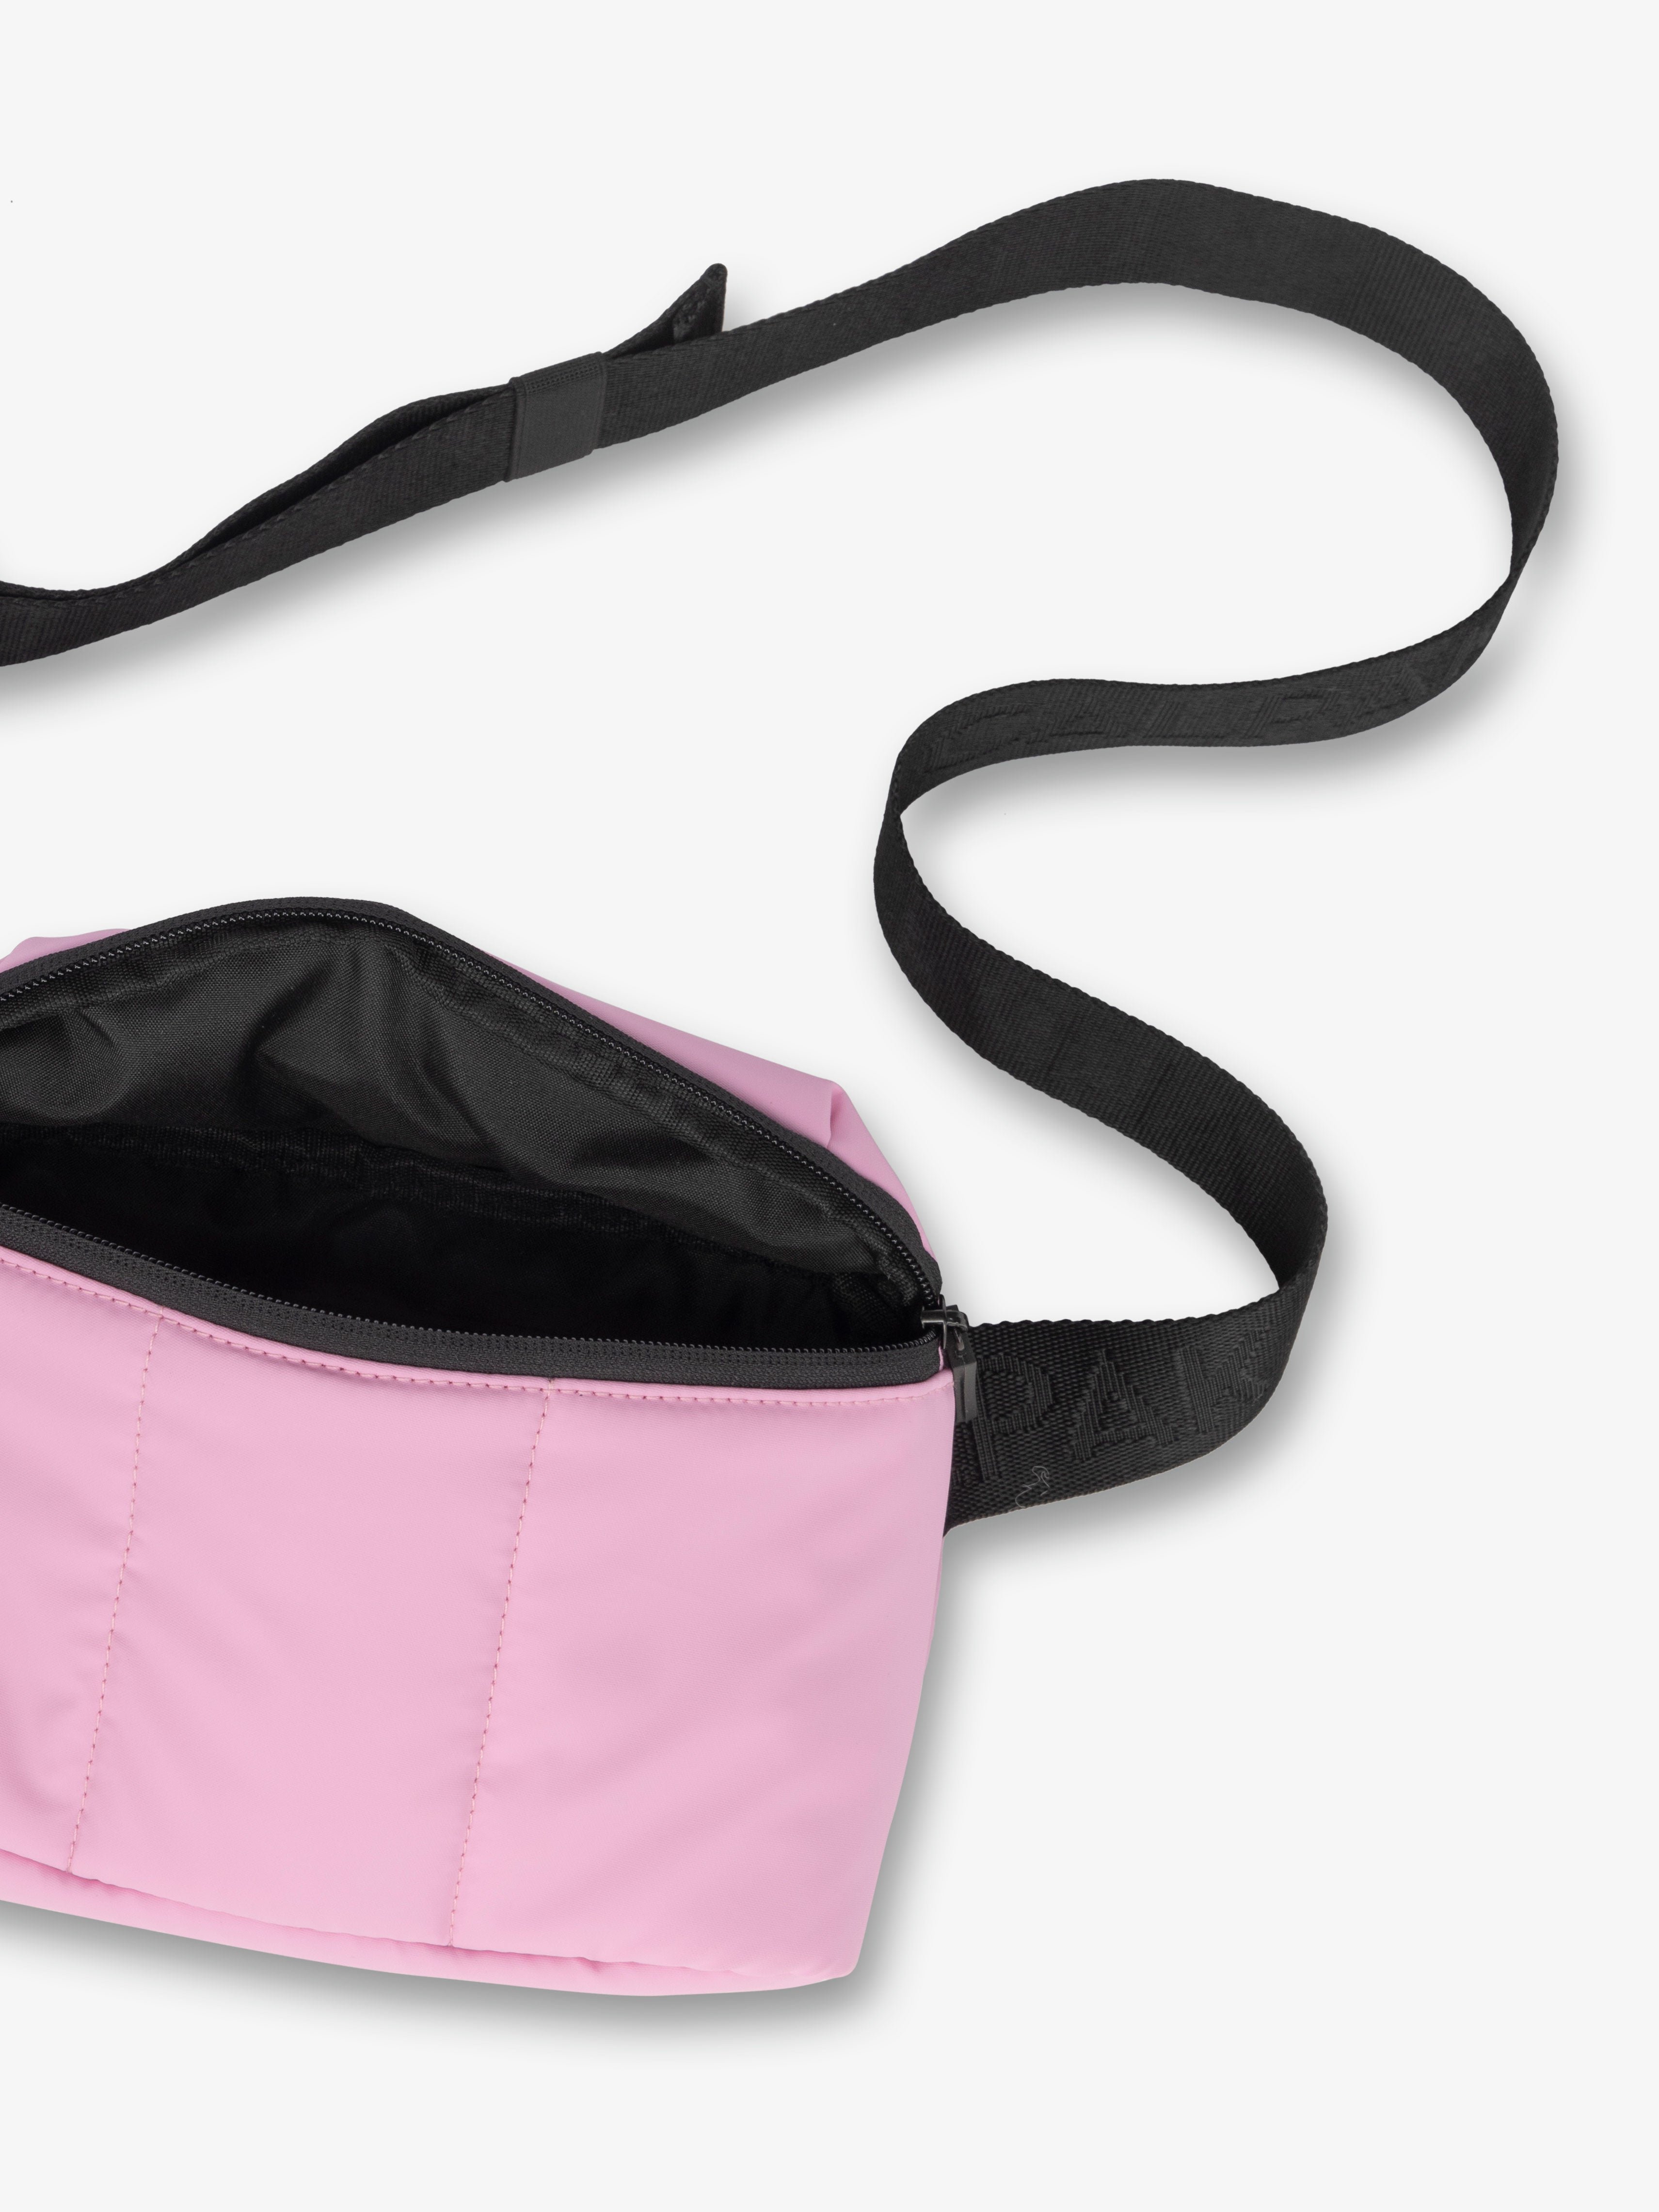 CALPAK Luka mini crossbody fanny pack with soft water-resistant exterior and adjustable strap in pink